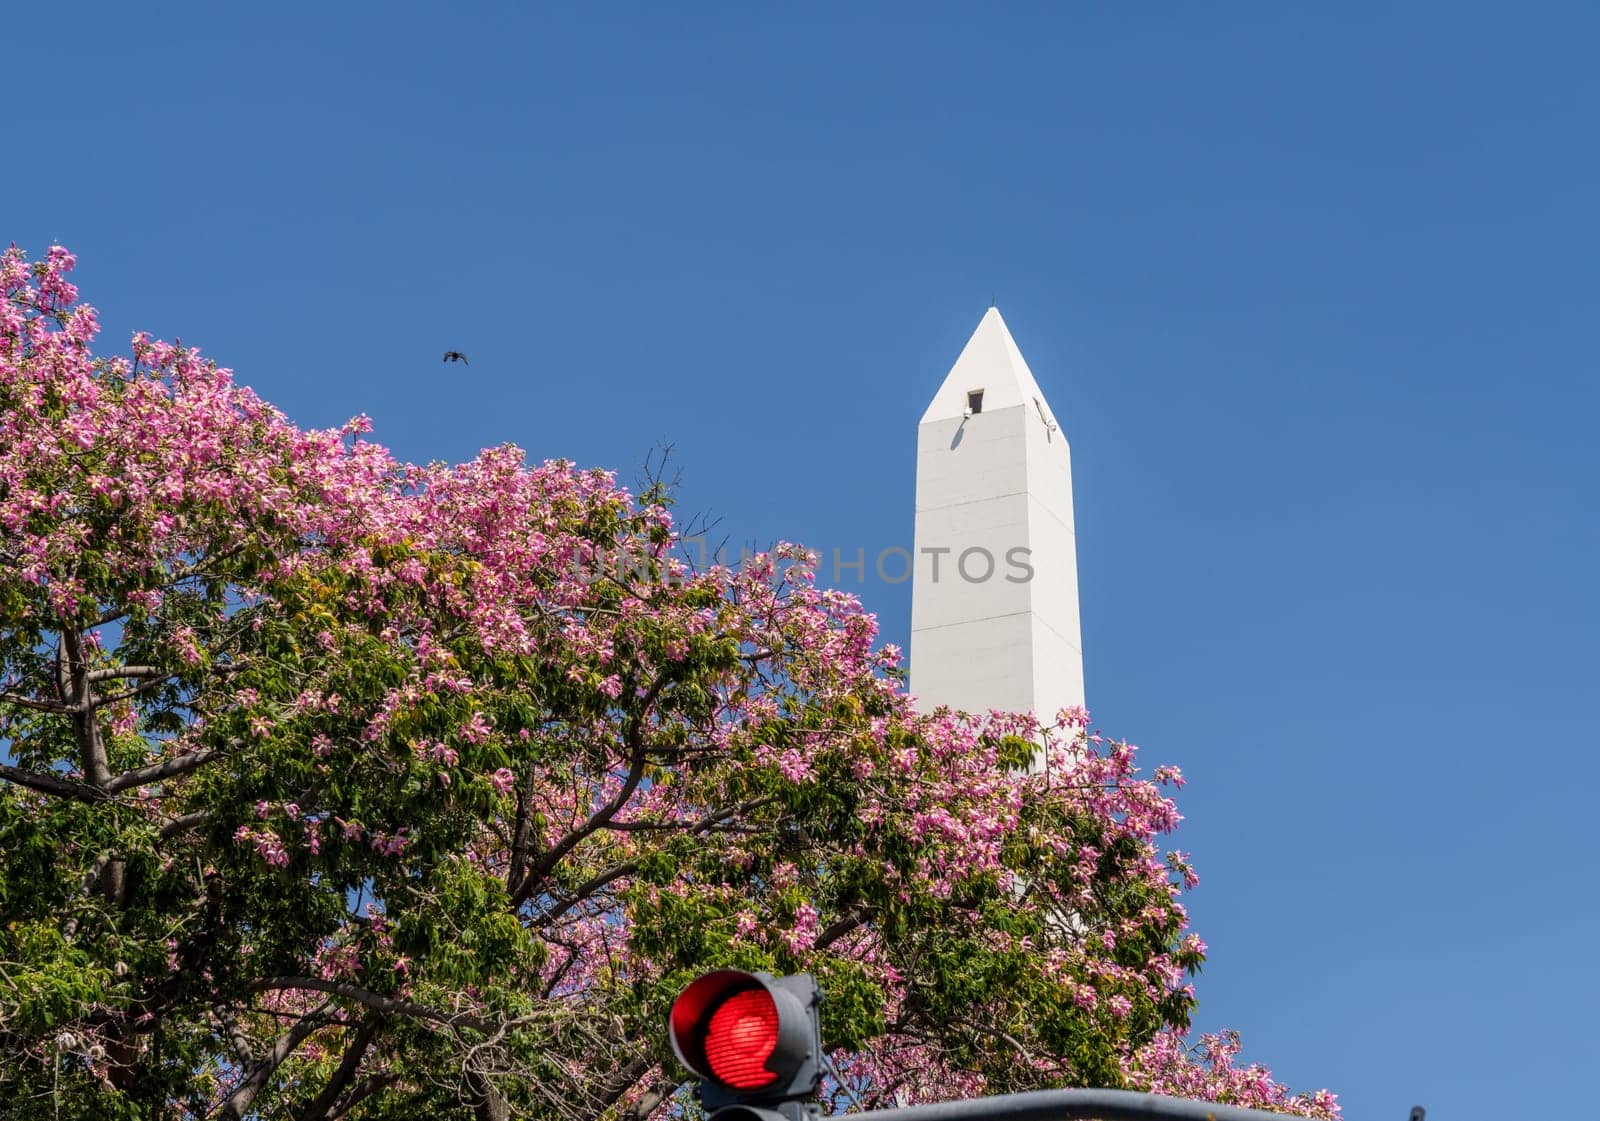 Obelisk of Buenos Aires in Argentina is icon of city and here rises above a stop sign and flowering trees